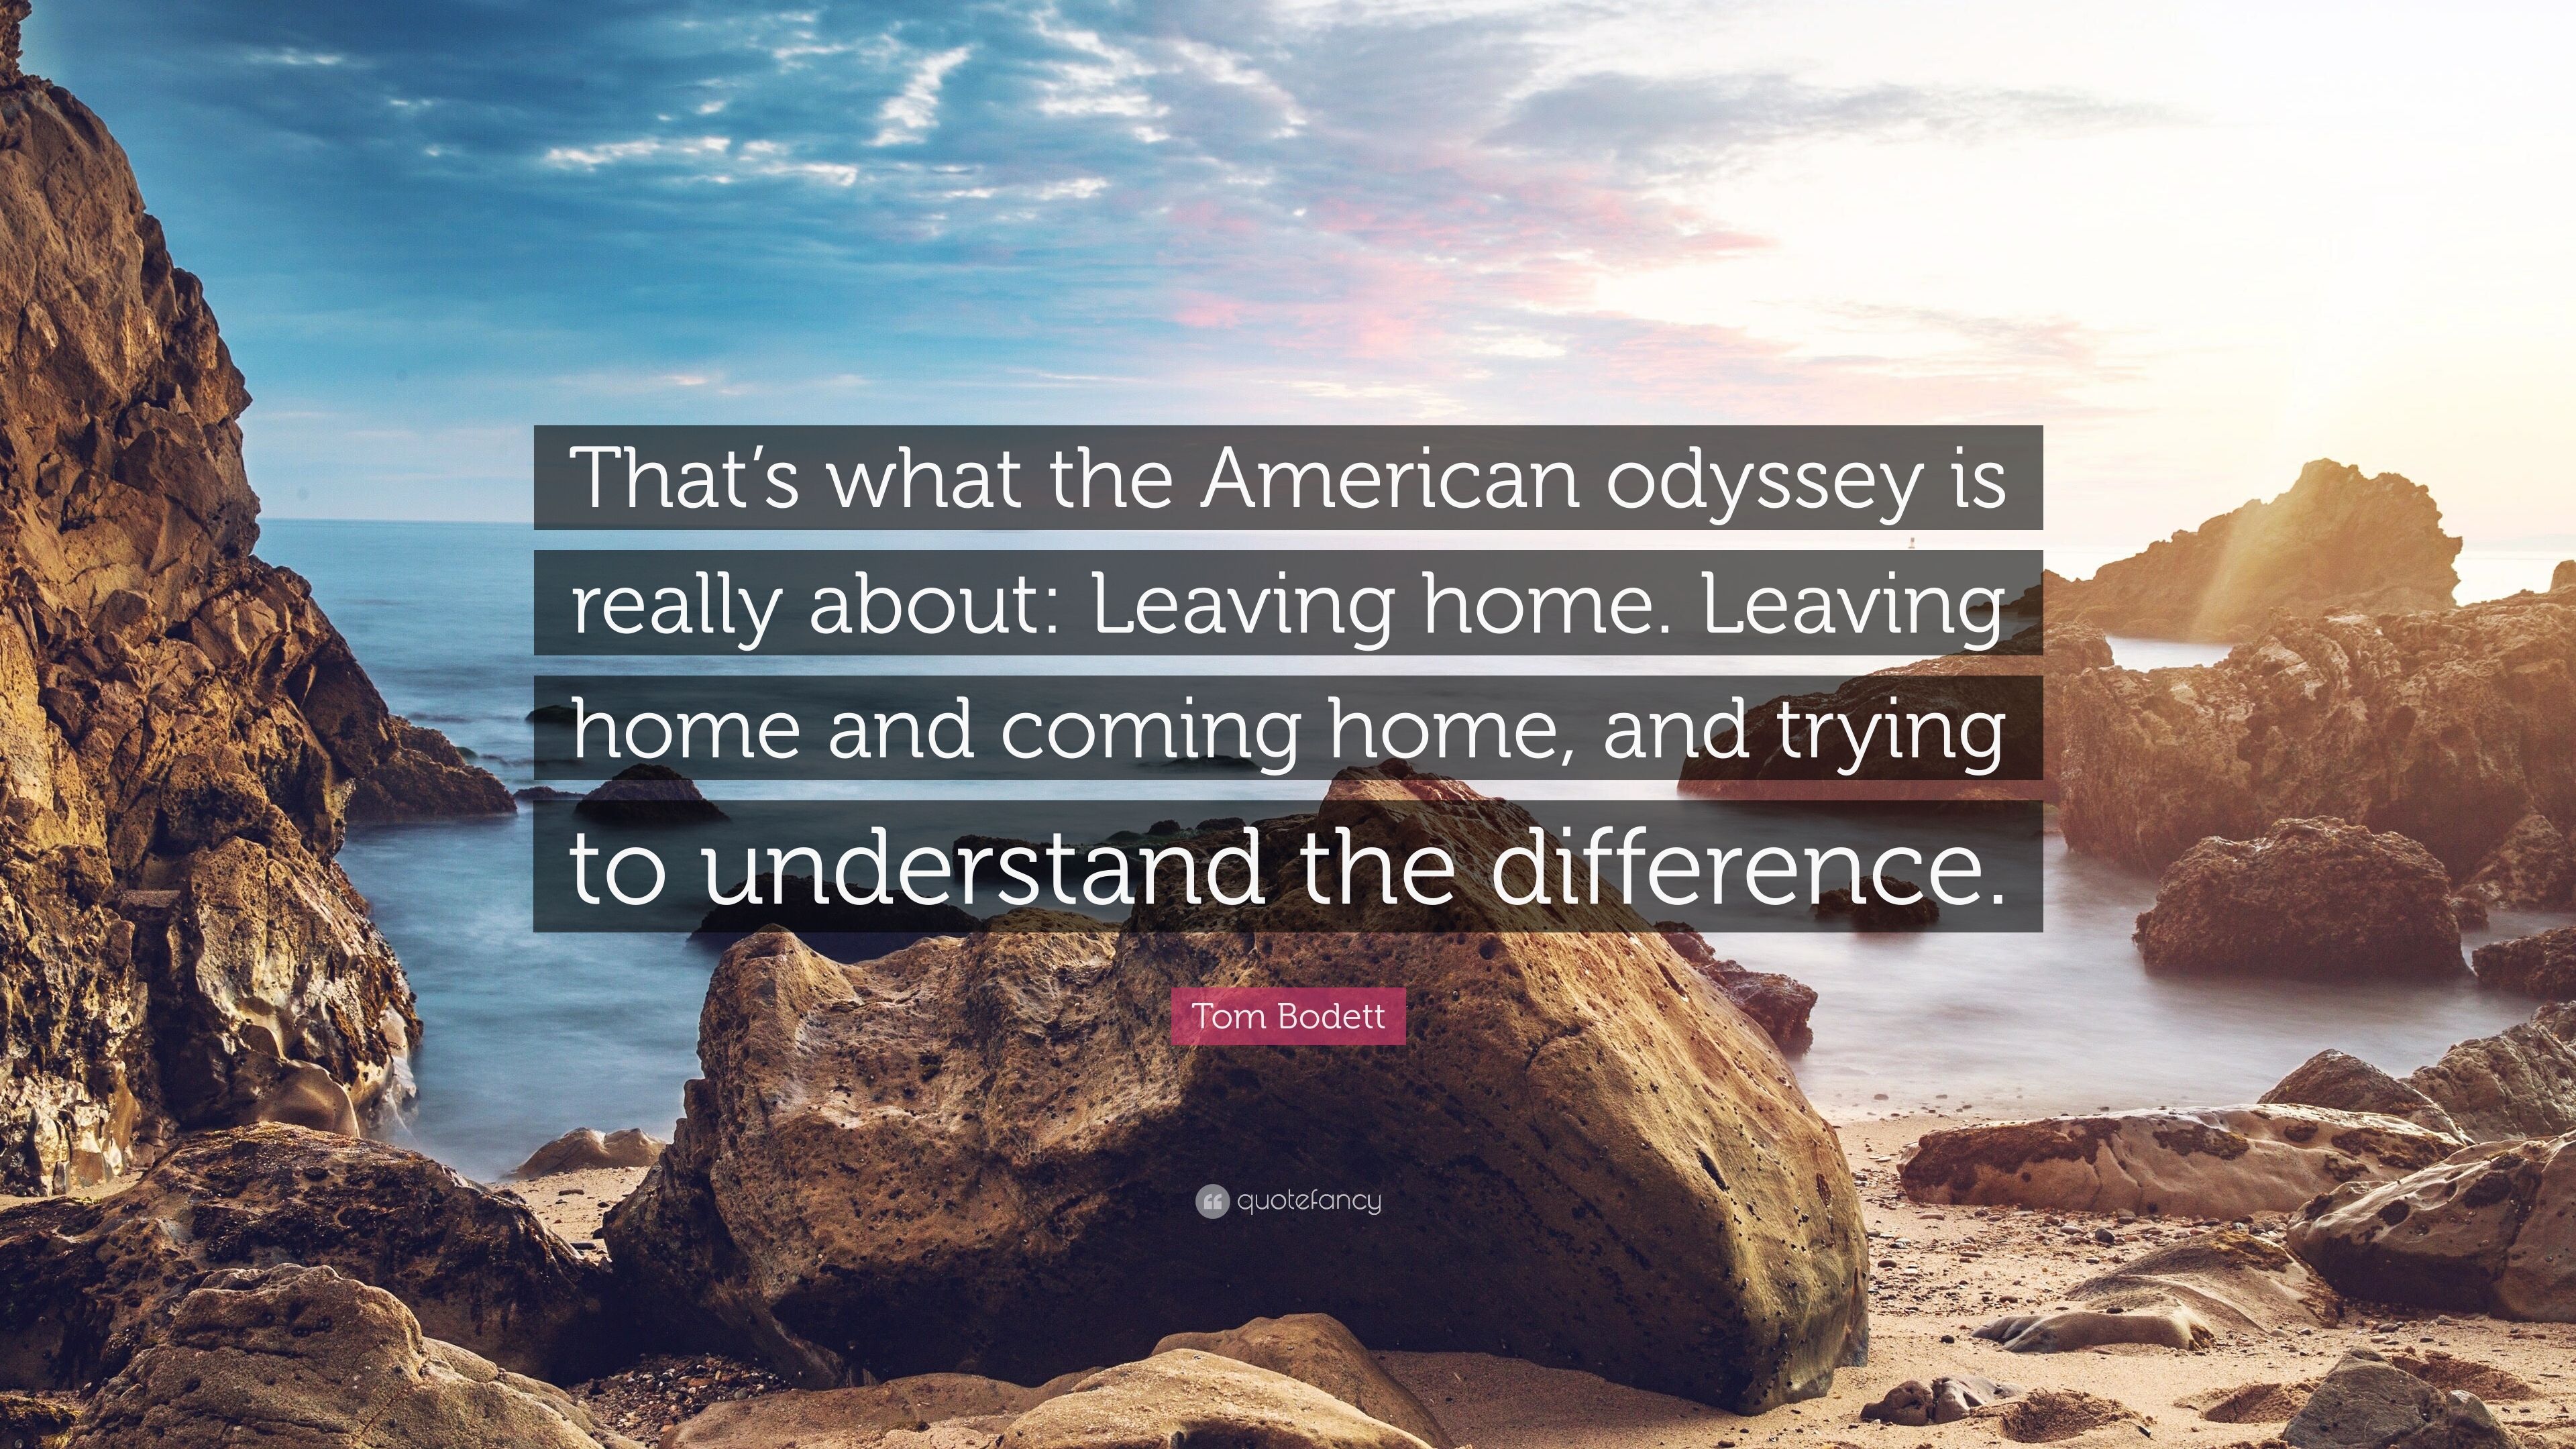 American Odyssey Wallpapers